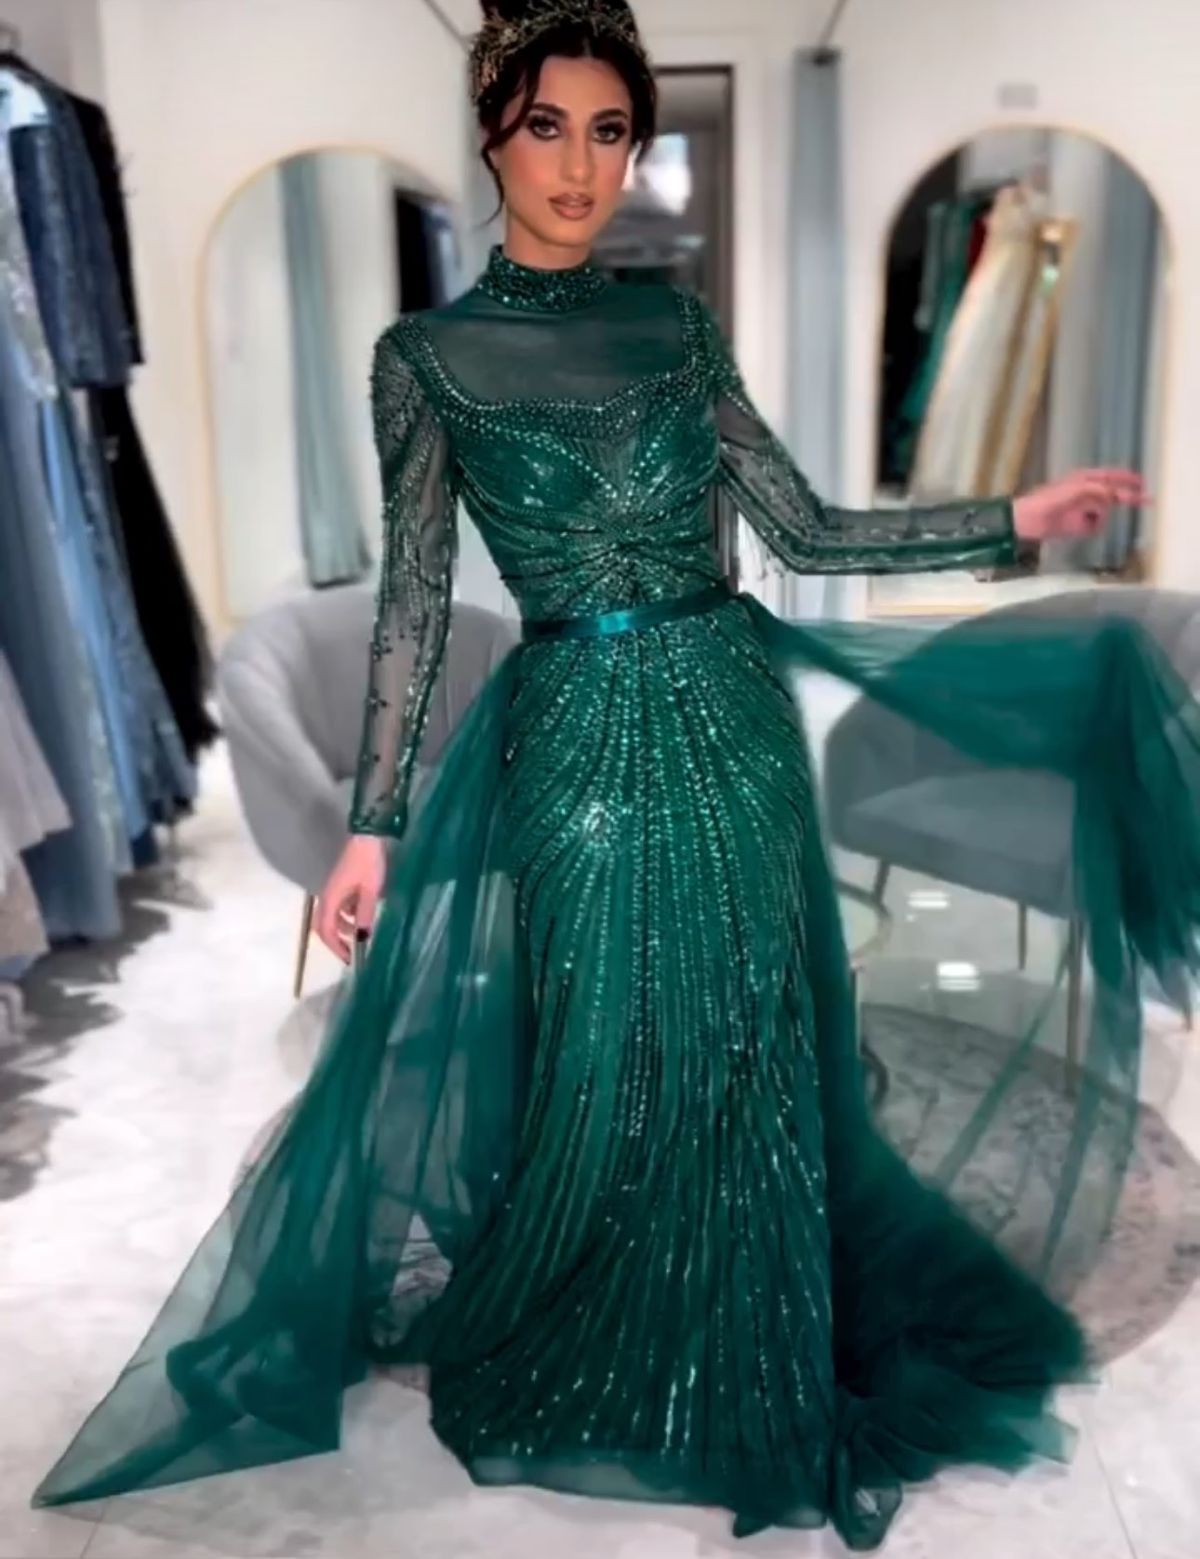 Green Sequin Jewel Mermaid Long Sleeve Evening Dress with Detached Train  ED31557 | Ball gowns, Long sleeve evening dresses, Evening dresses